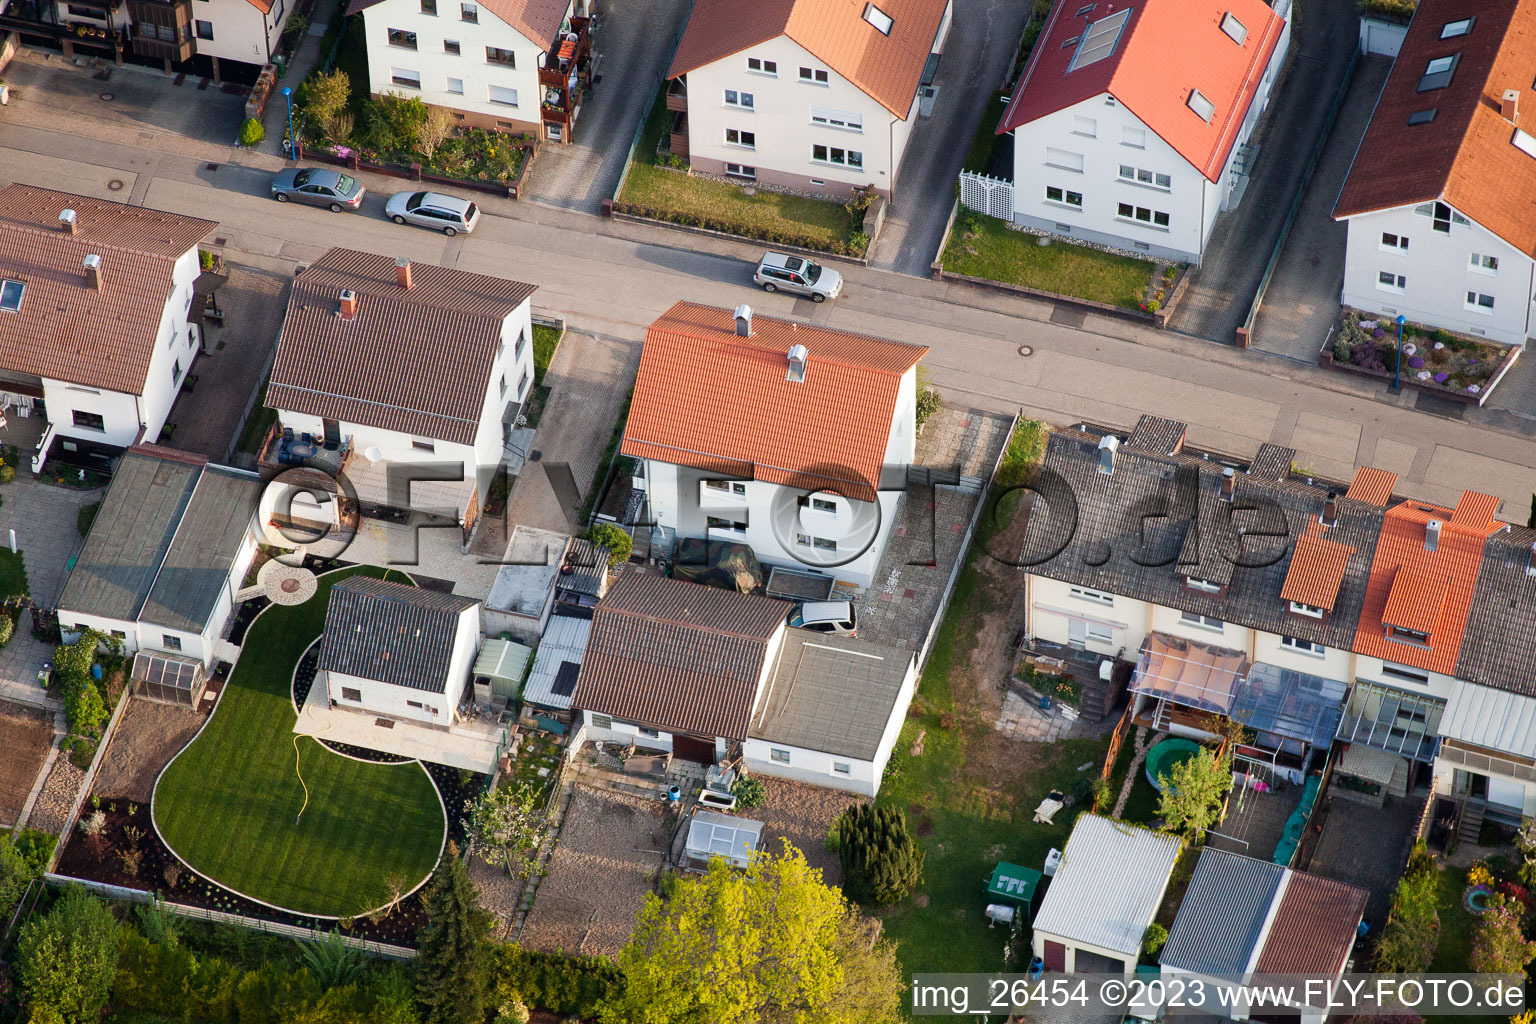 Home gardens on Rosenstr in the district Reichenbach in Waldbronn in the state Baden-Wuerttemberg, Germany out of the air